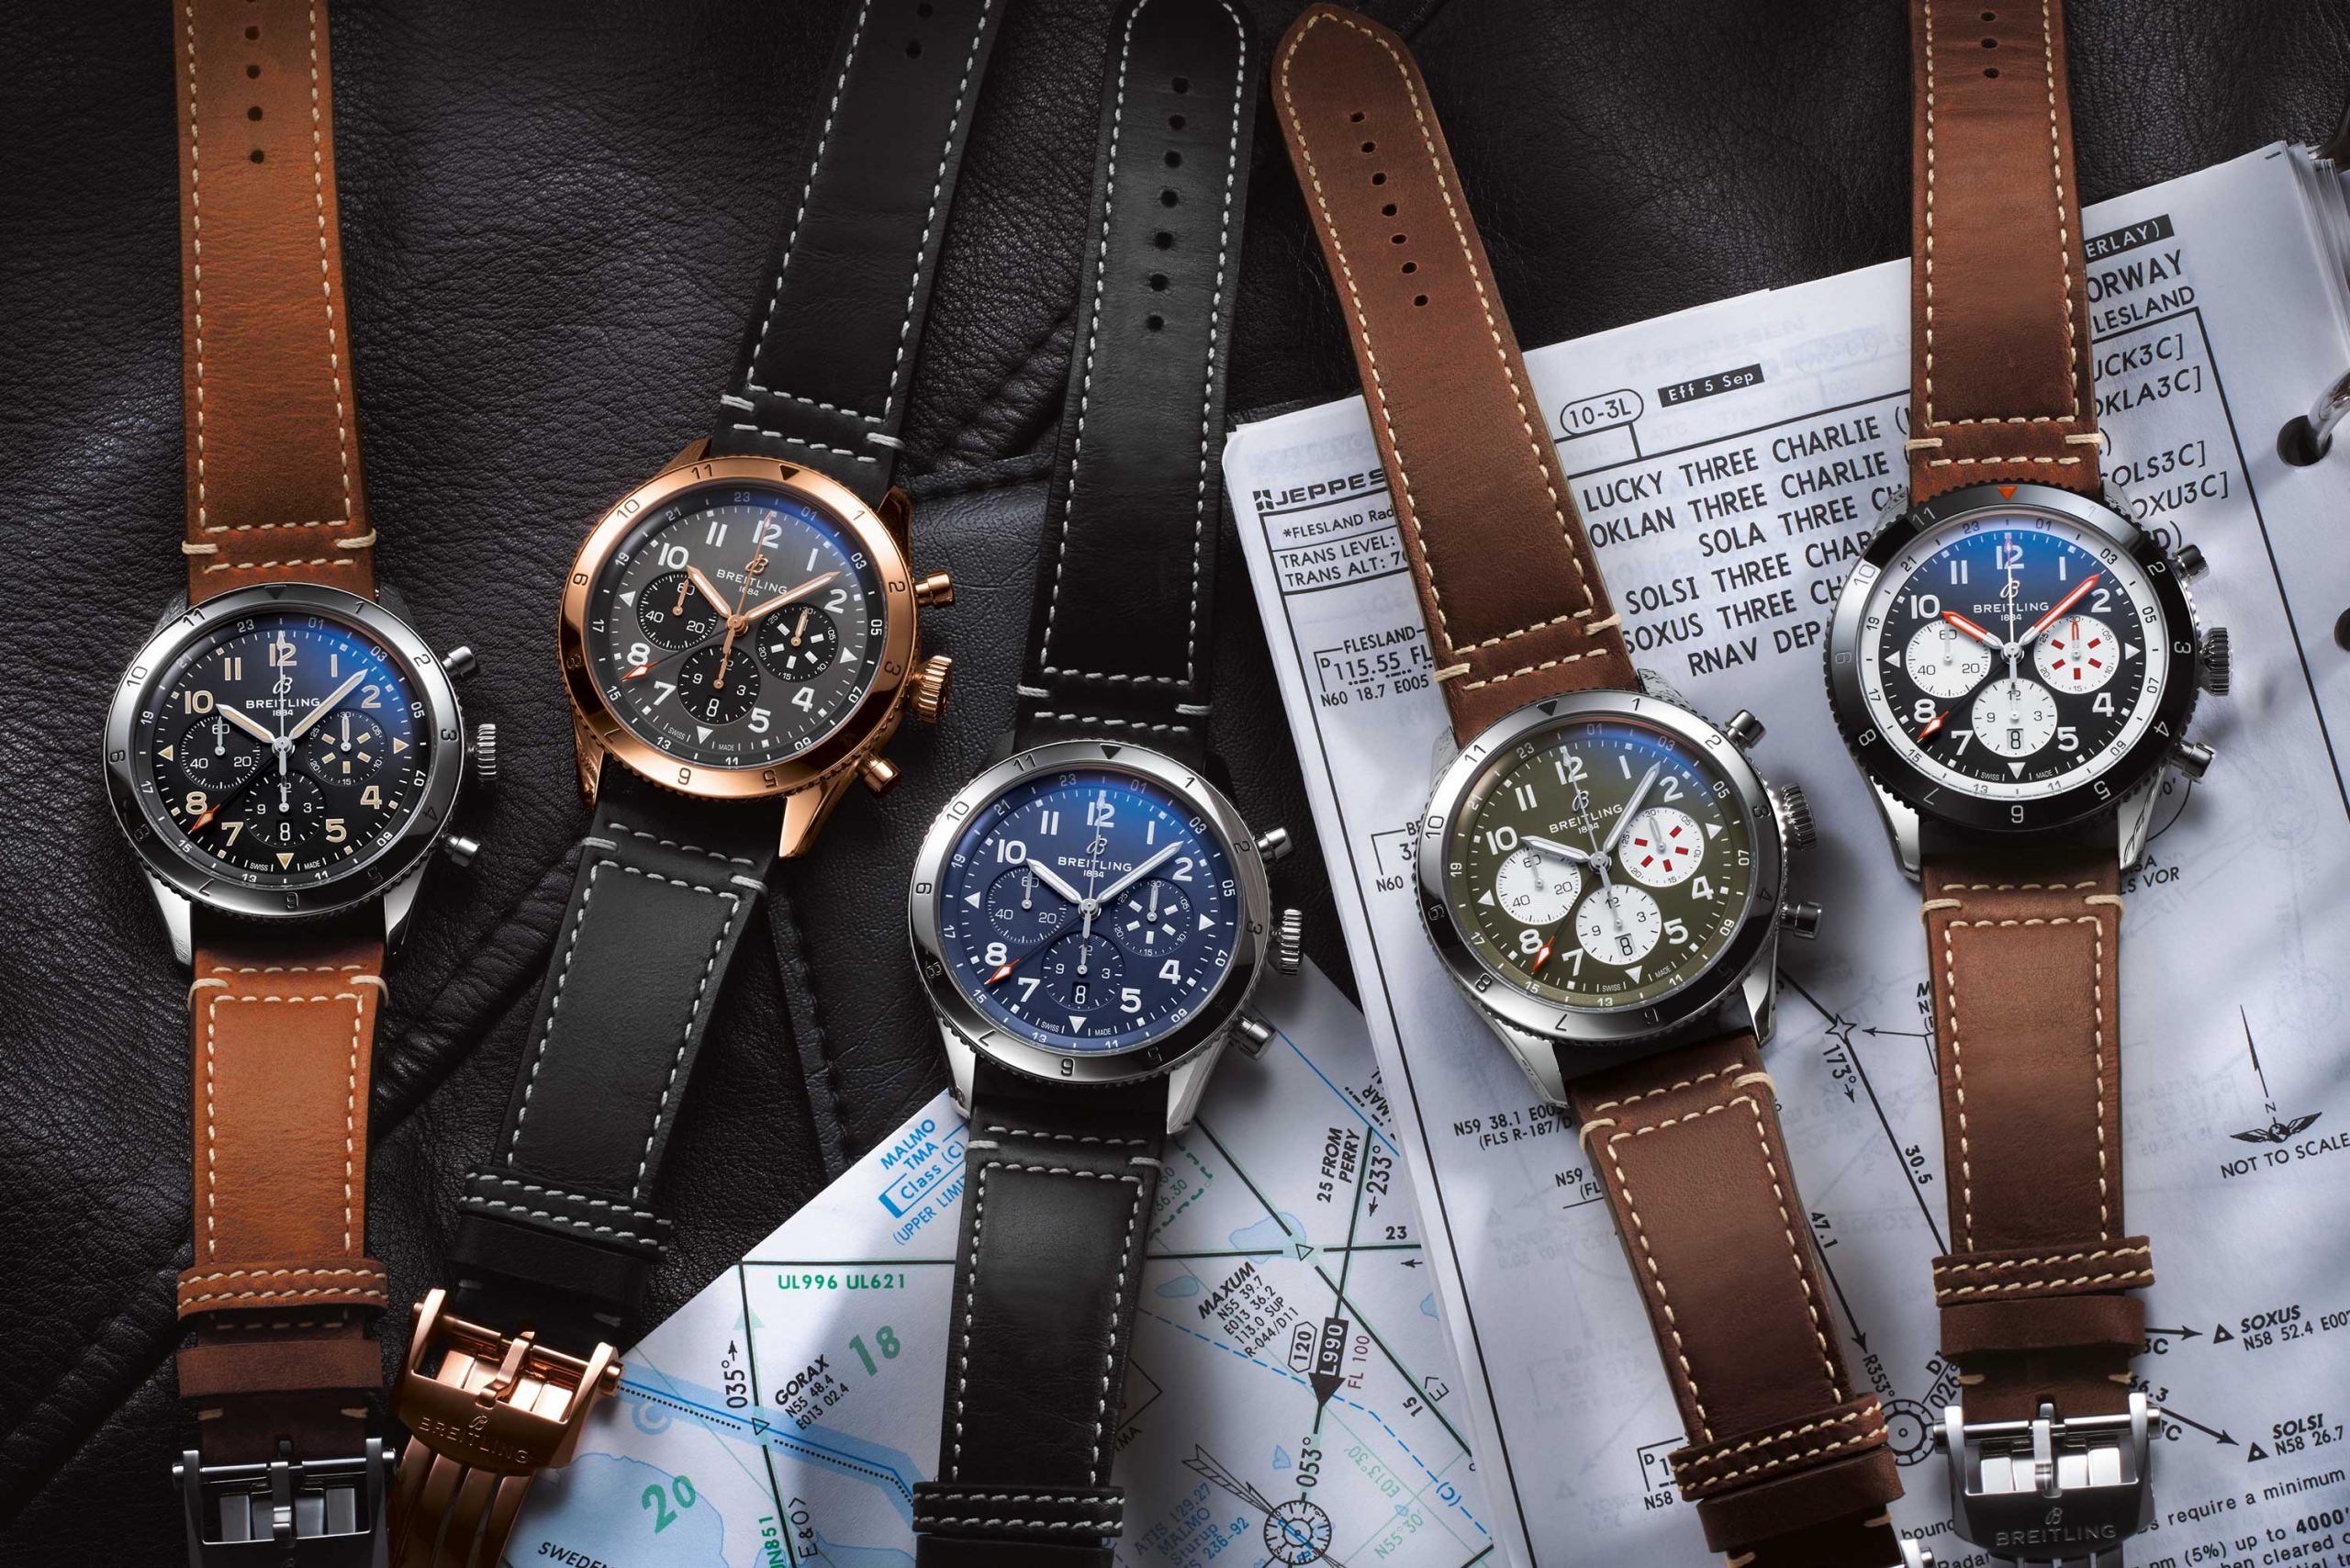 The 2021 Super AVI Collection is a collection of five new watches, inspired by four legendary planes from the 1940s and one watch from their own archives, the superb 1953 “Co-Pilot” Ref. 765 AVI aviator’s watch